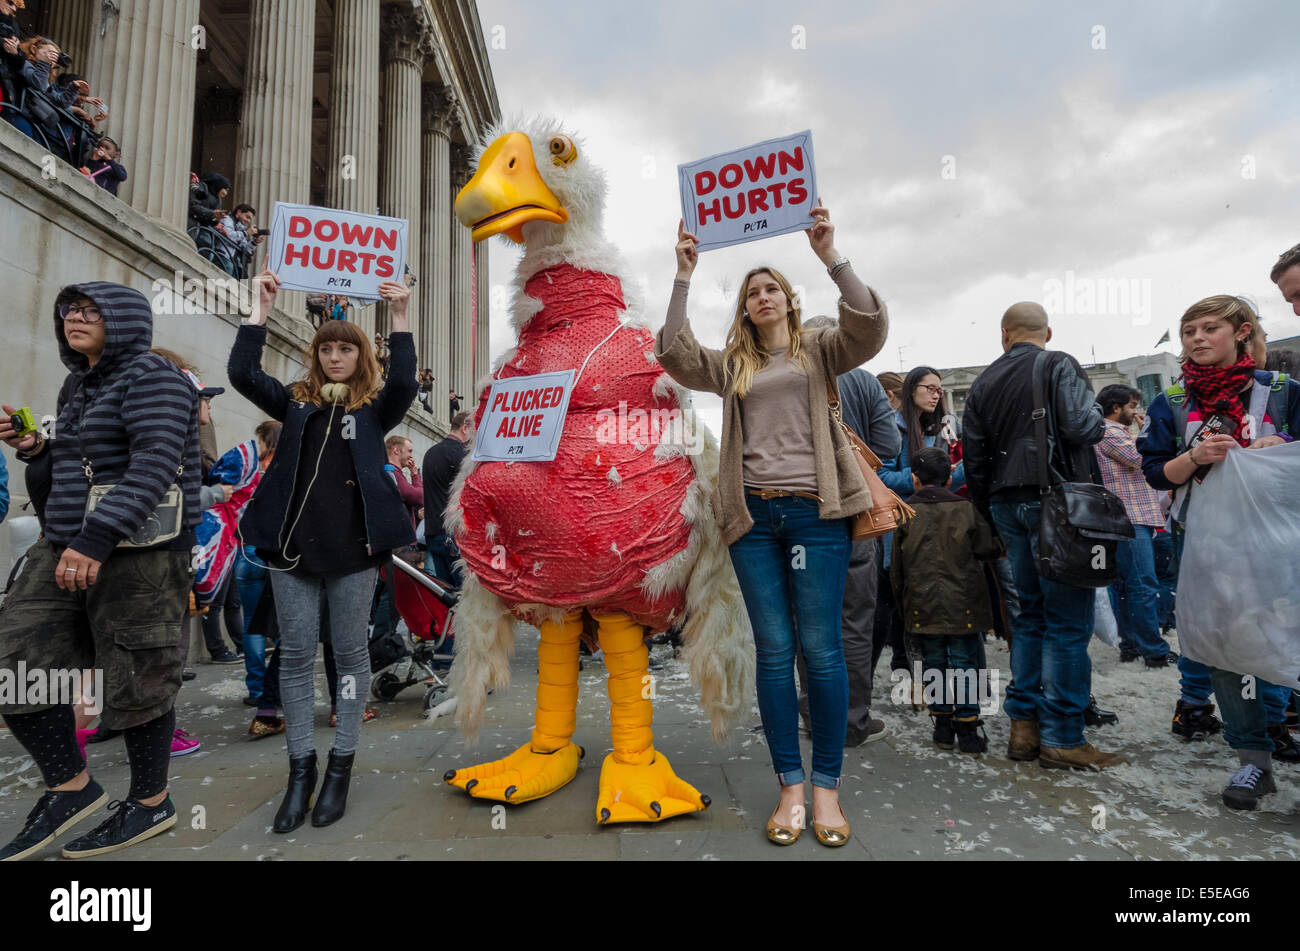 PETA activists hold protest during Pillow Fight in Trafalgar Square Stock Photo